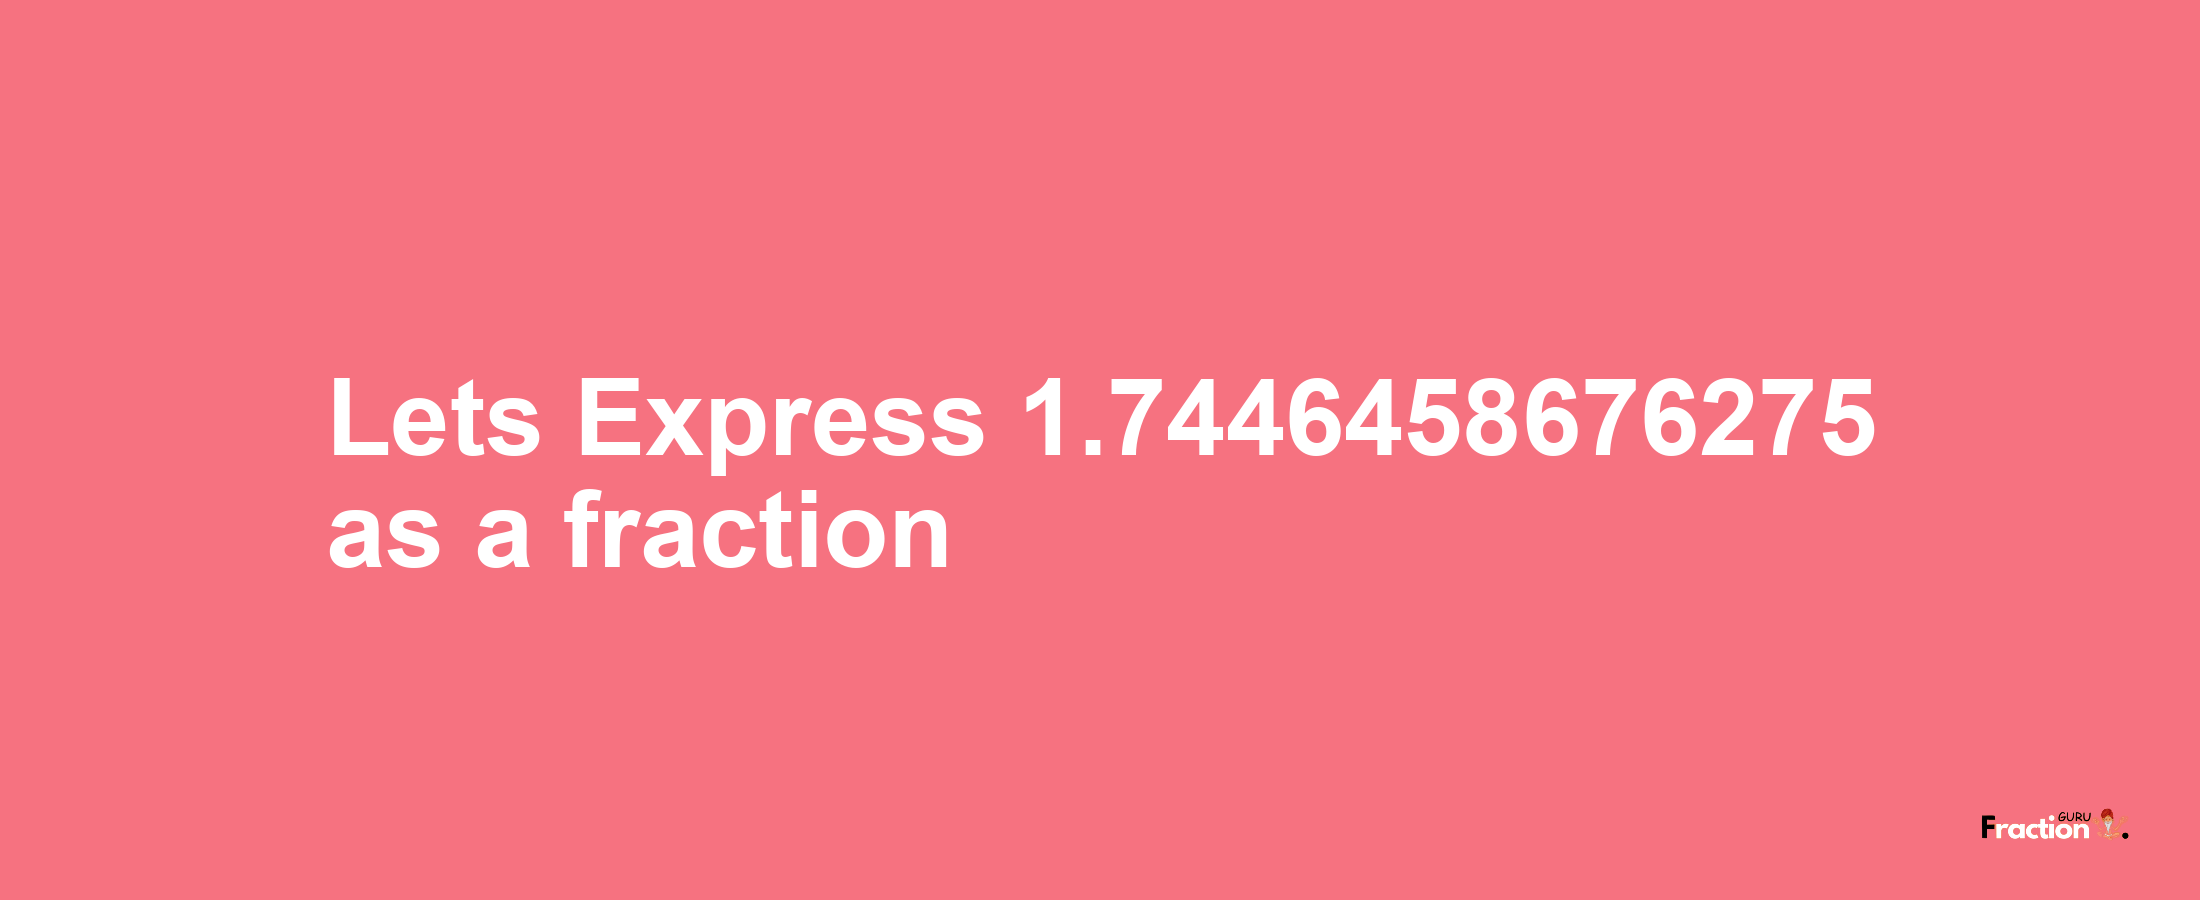 Lets Express 1.7446458676275 as afraction